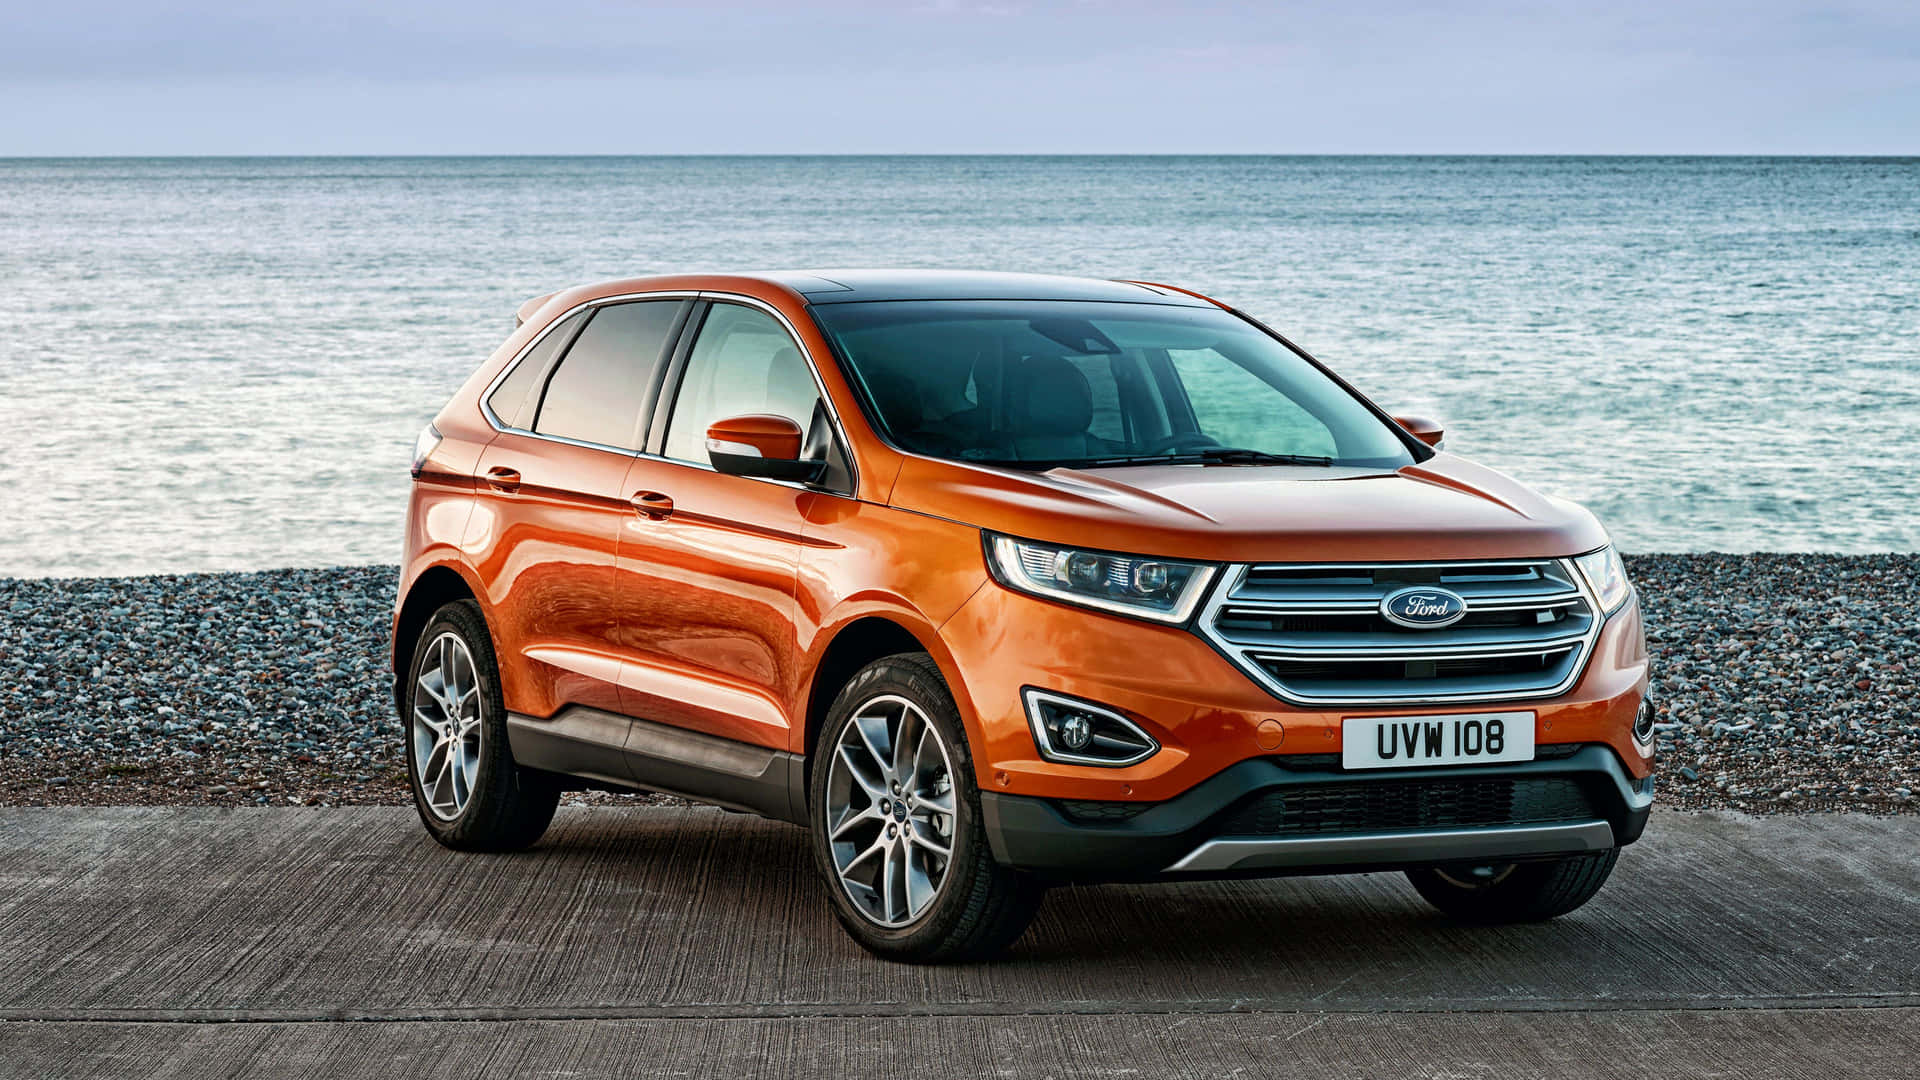 Stunning Ford Edge on the Road Wallpaper